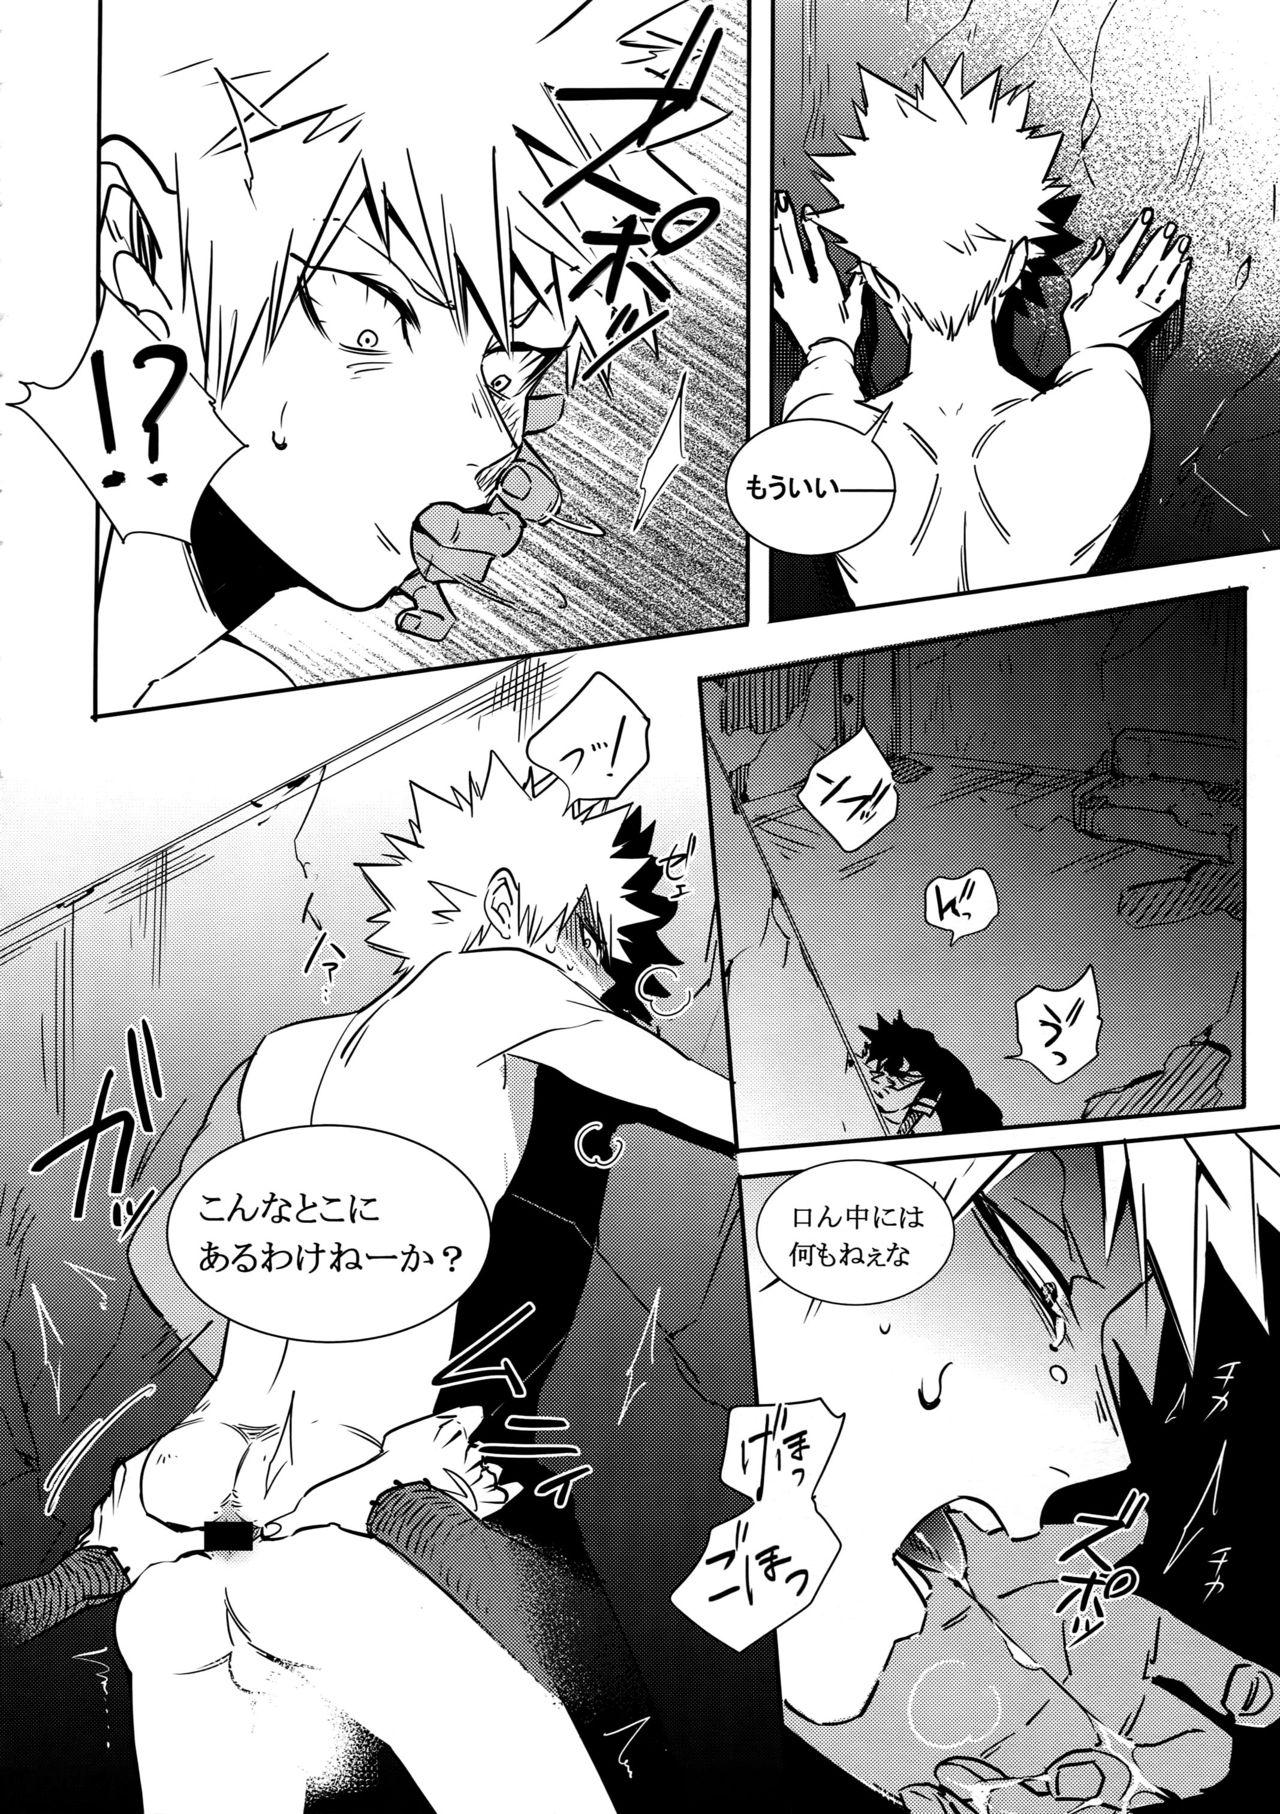 Best Blowjob BAD END - My hero academia Village - Page 10